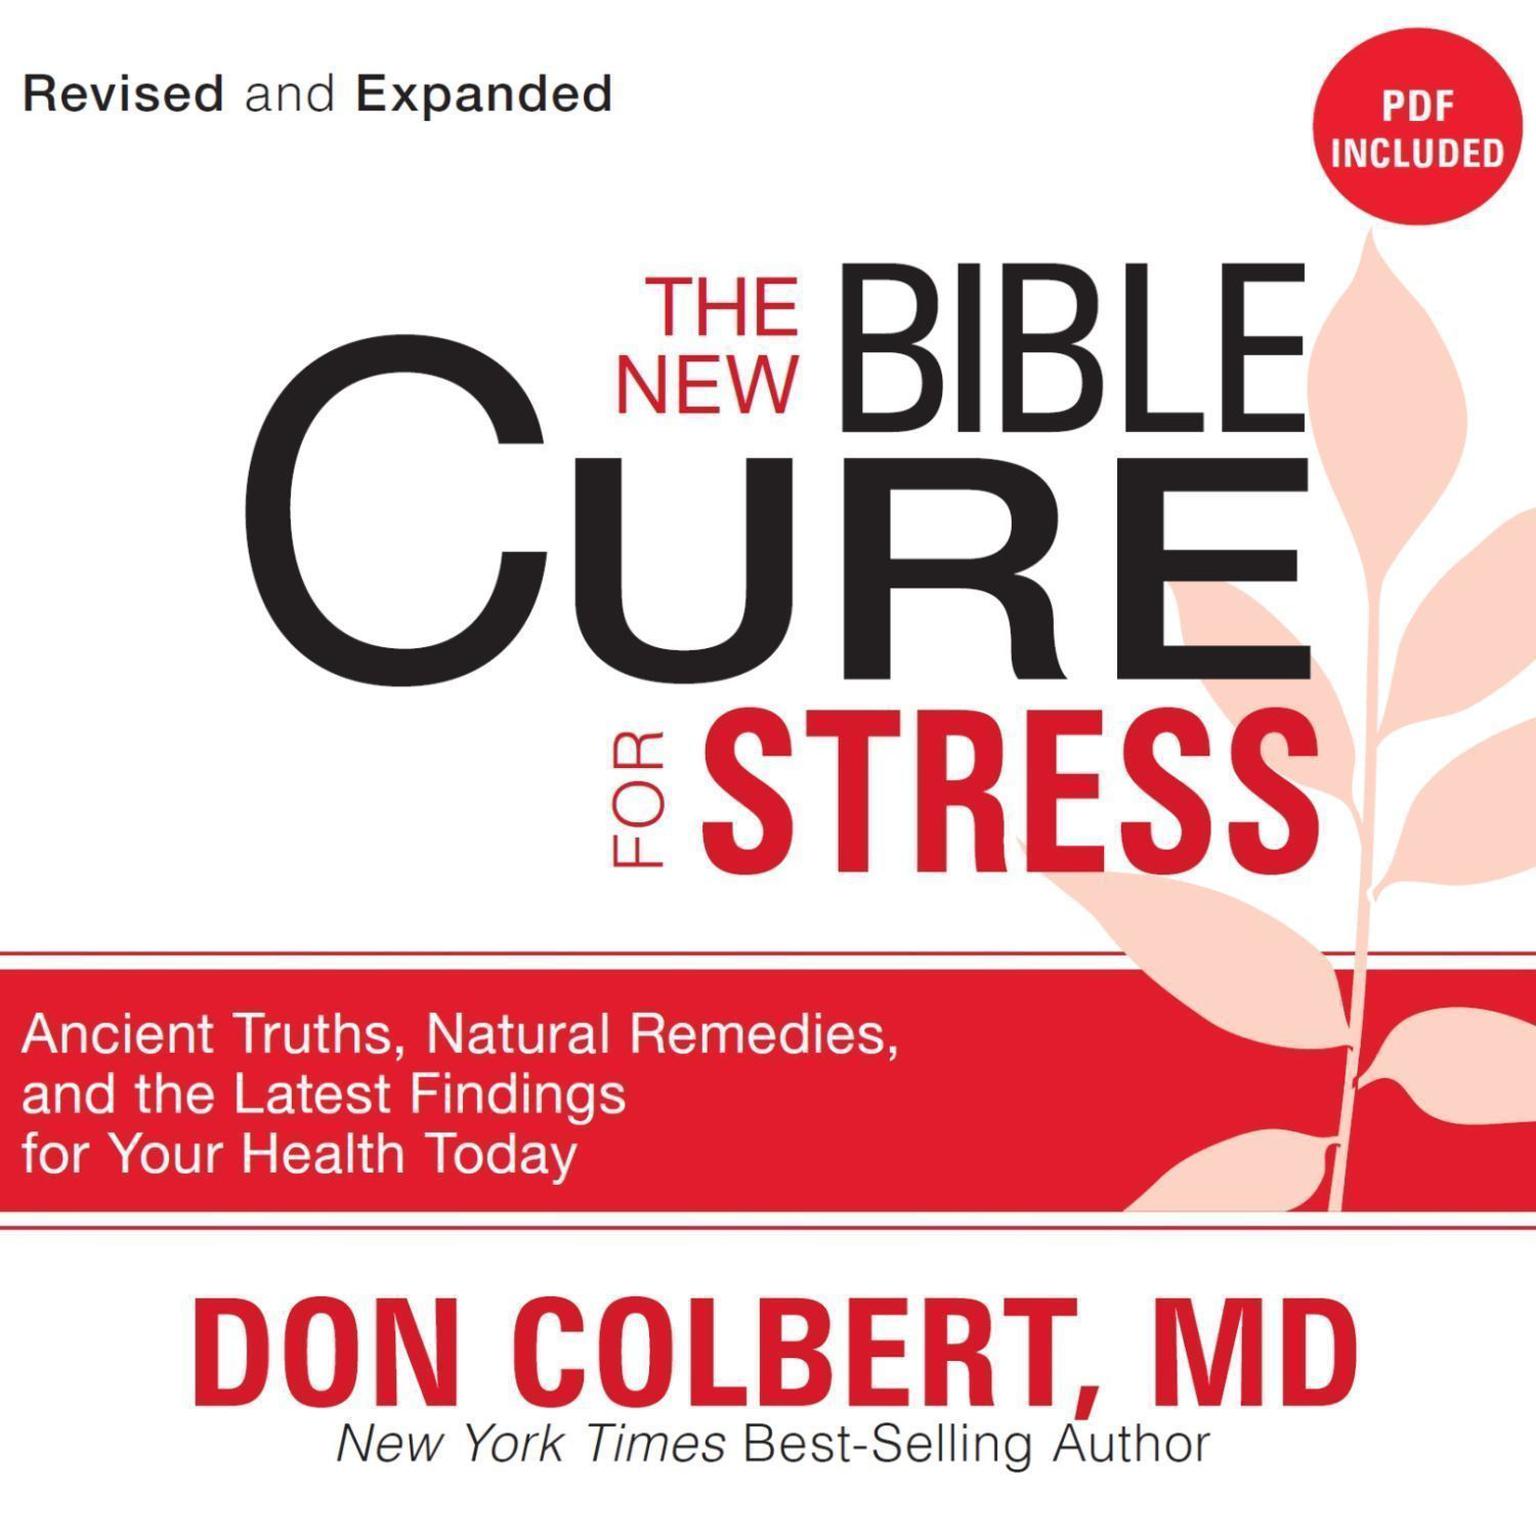 The New Bible Cure for Stress: Ancient Truths, Natural Remedies, and the Latest Findings for Your Health Today Audiobook, by Don Colbert